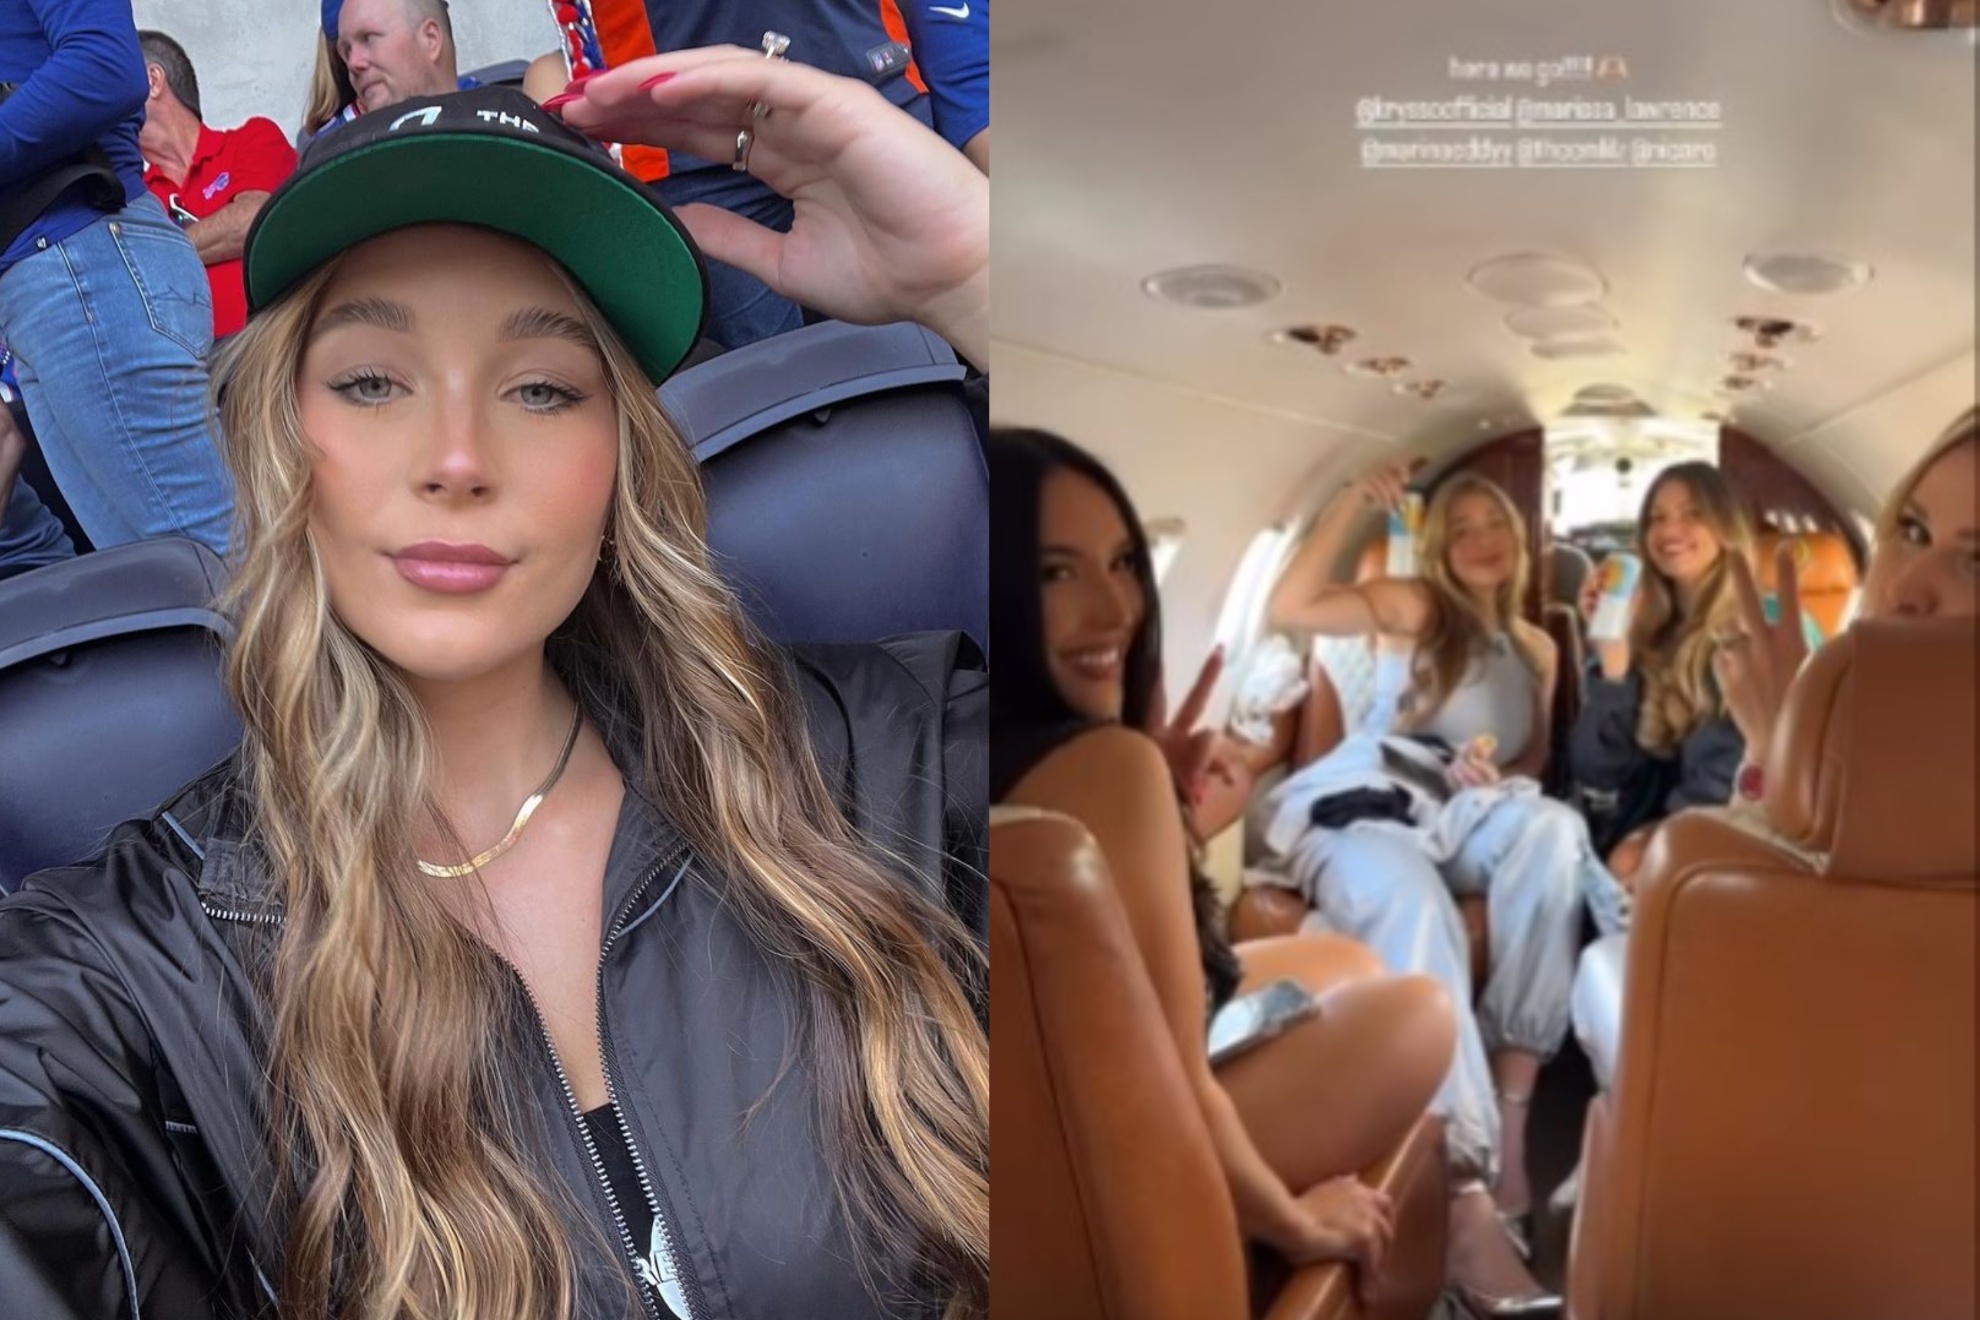 Marissa Lawrence travelled to New Orleans with a group of friends to see Trevor Lawrence on TNF